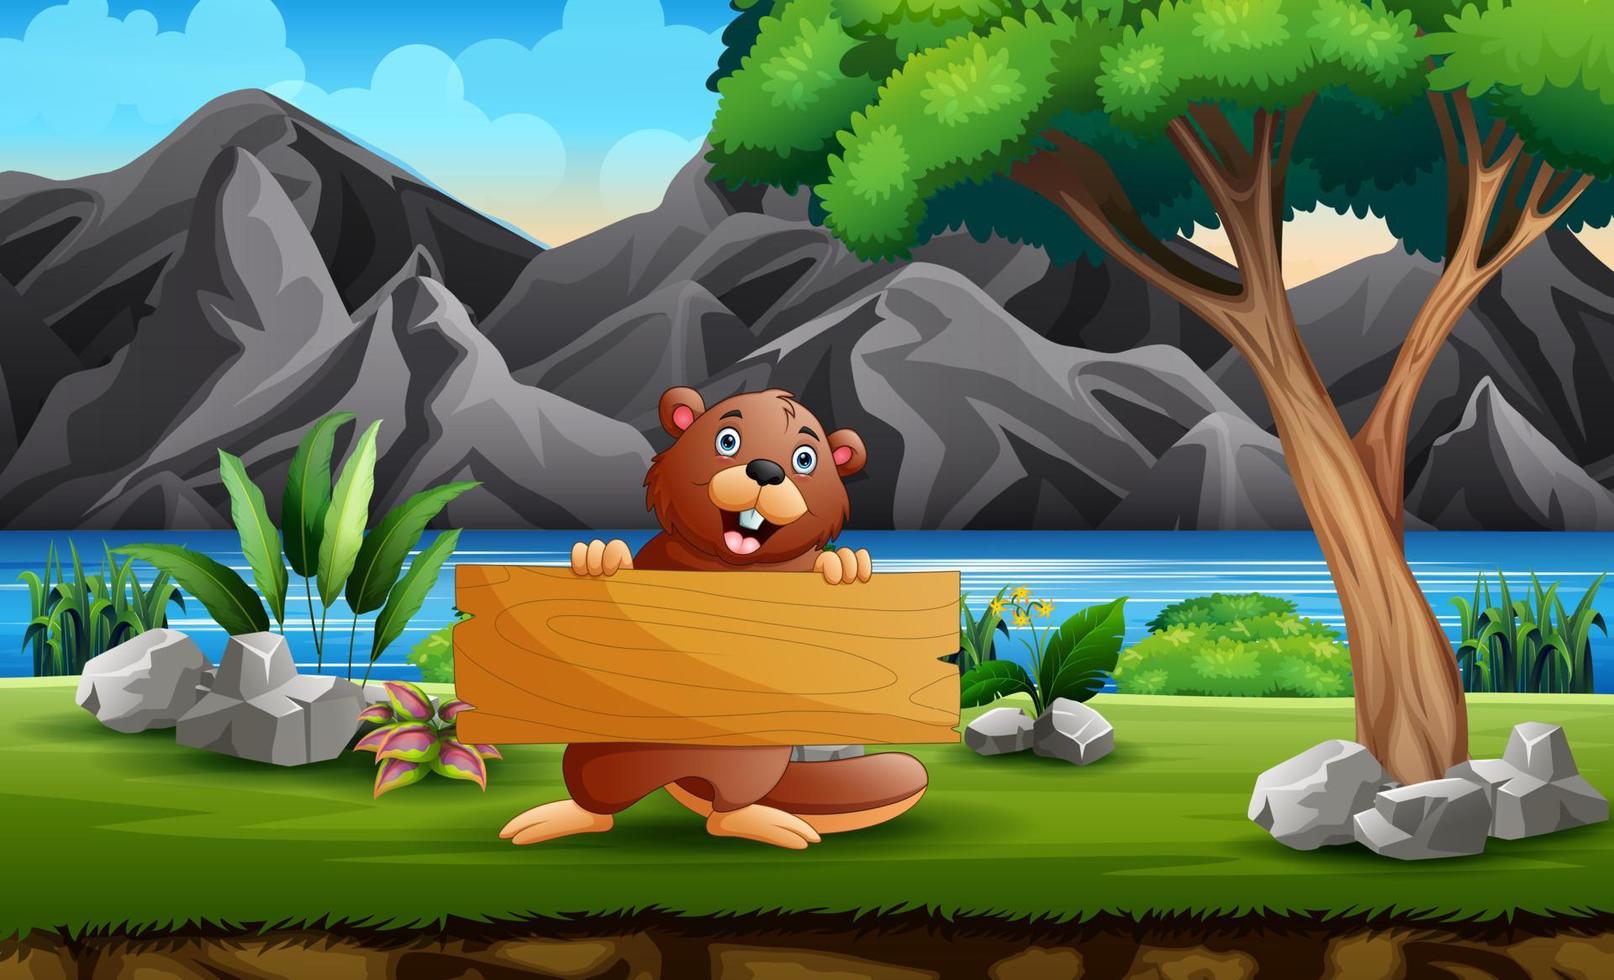 A beaver holding a wooden sign in nature background vector